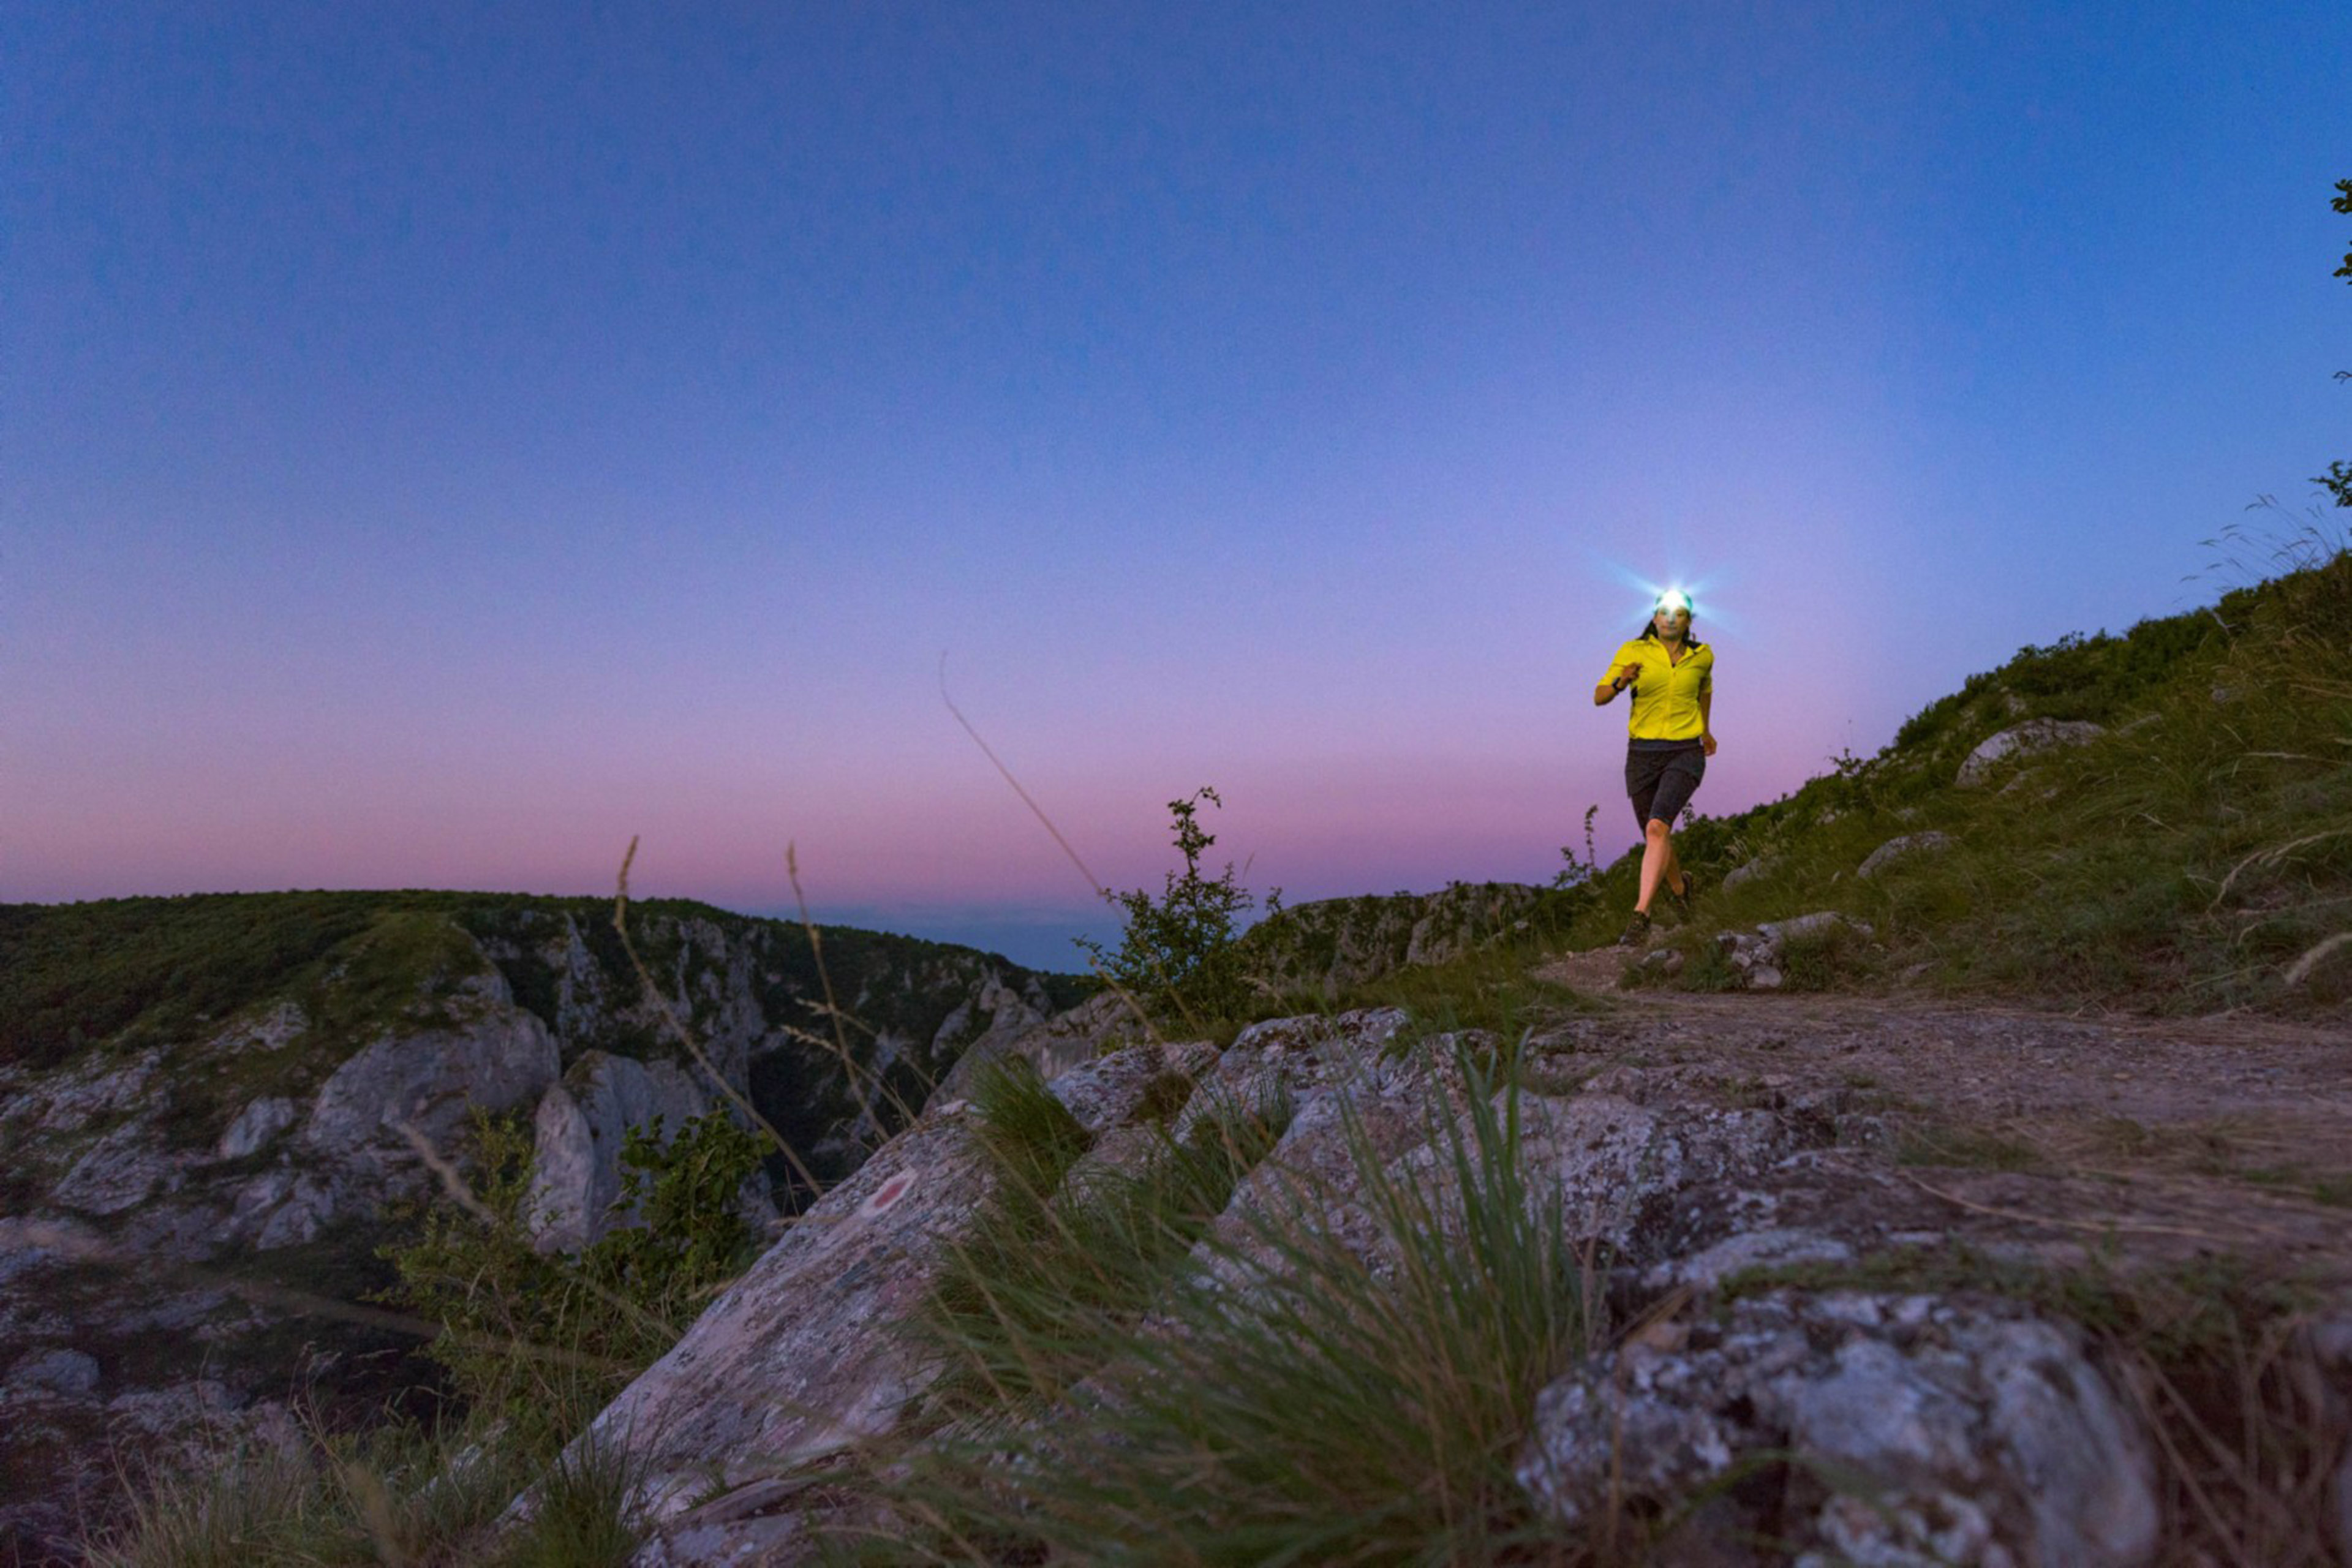 EY runnder training outdoors at dusk with a headtorch